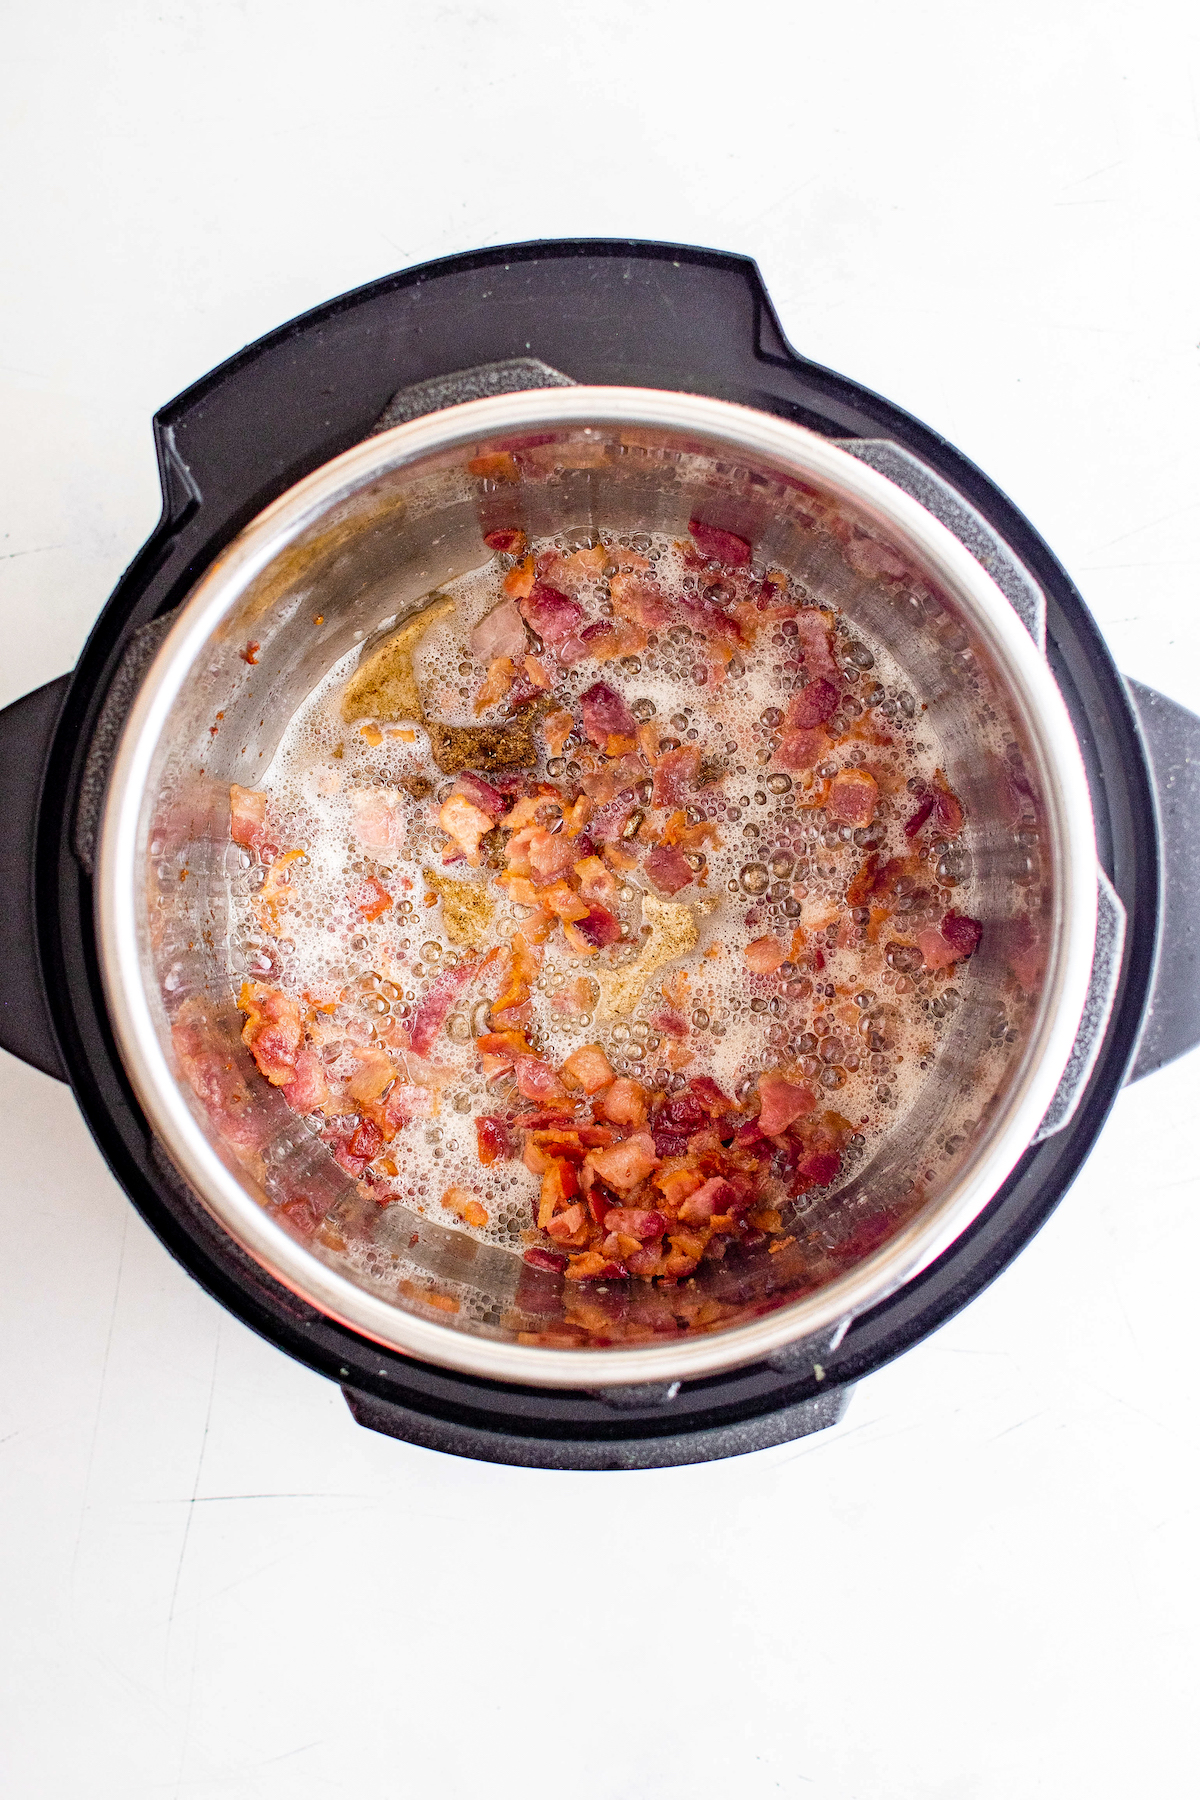 Crispy chopped bacon cooking in an instant pot.